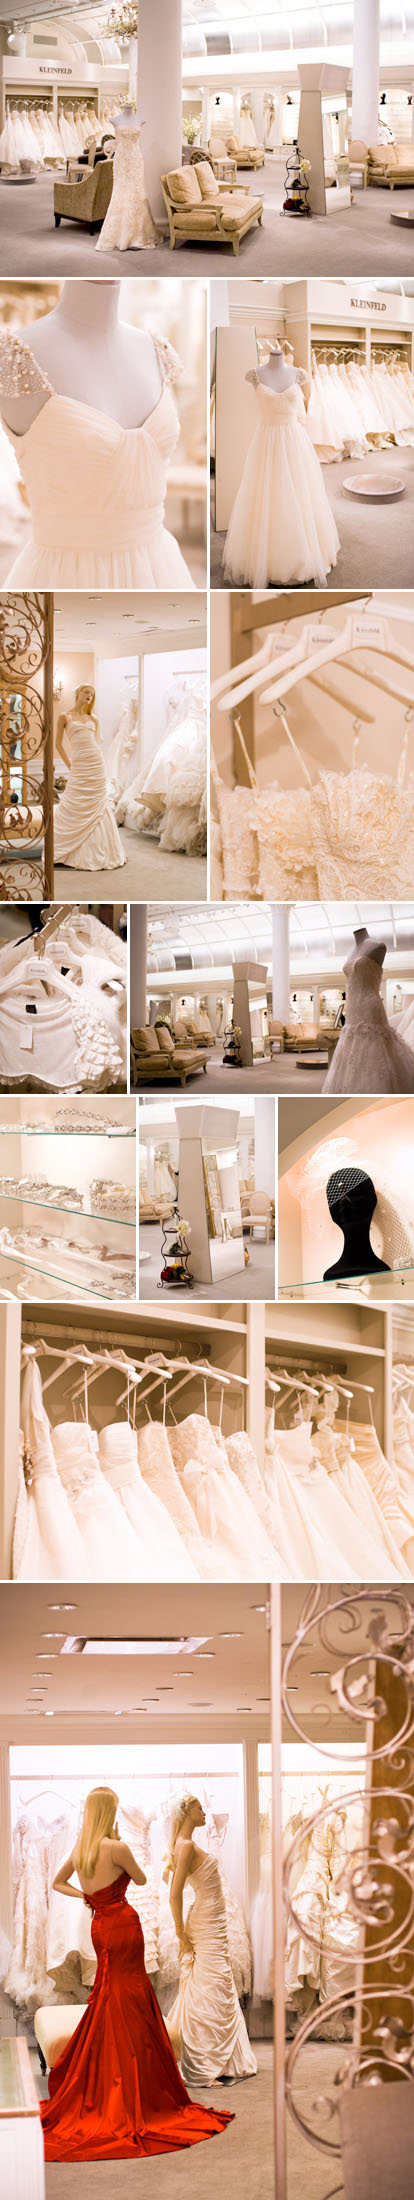 Kleinfeld Bridal, 'Say Yes to the Dress' wedding dress shop in New York City, images by Junebug Weddings